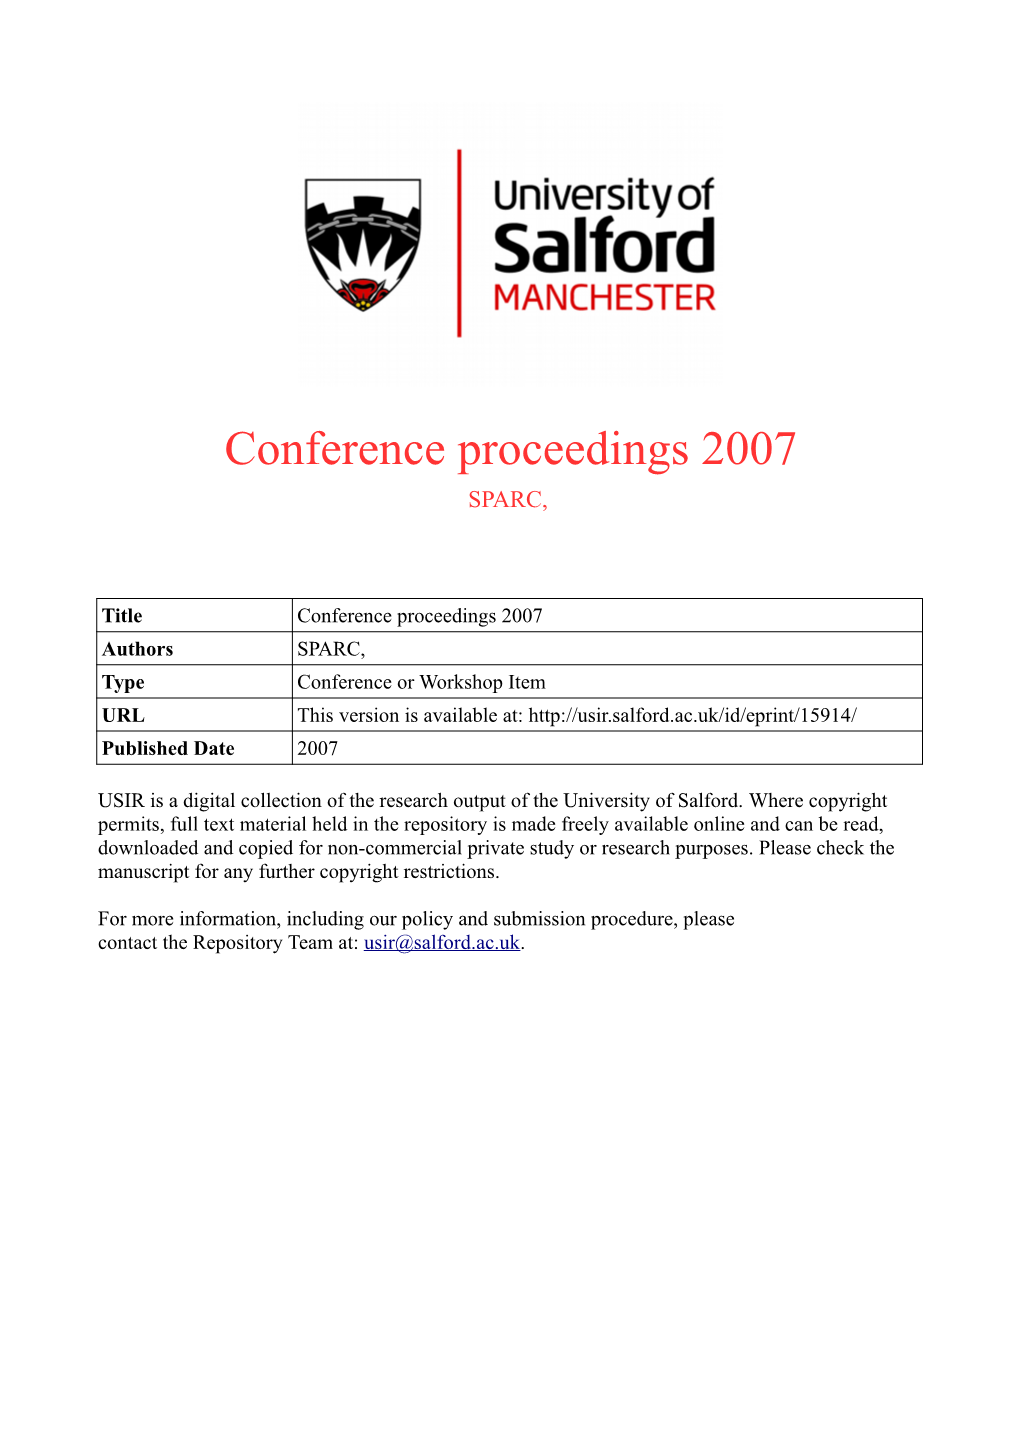 Conference Proceedings 2007 SPARC